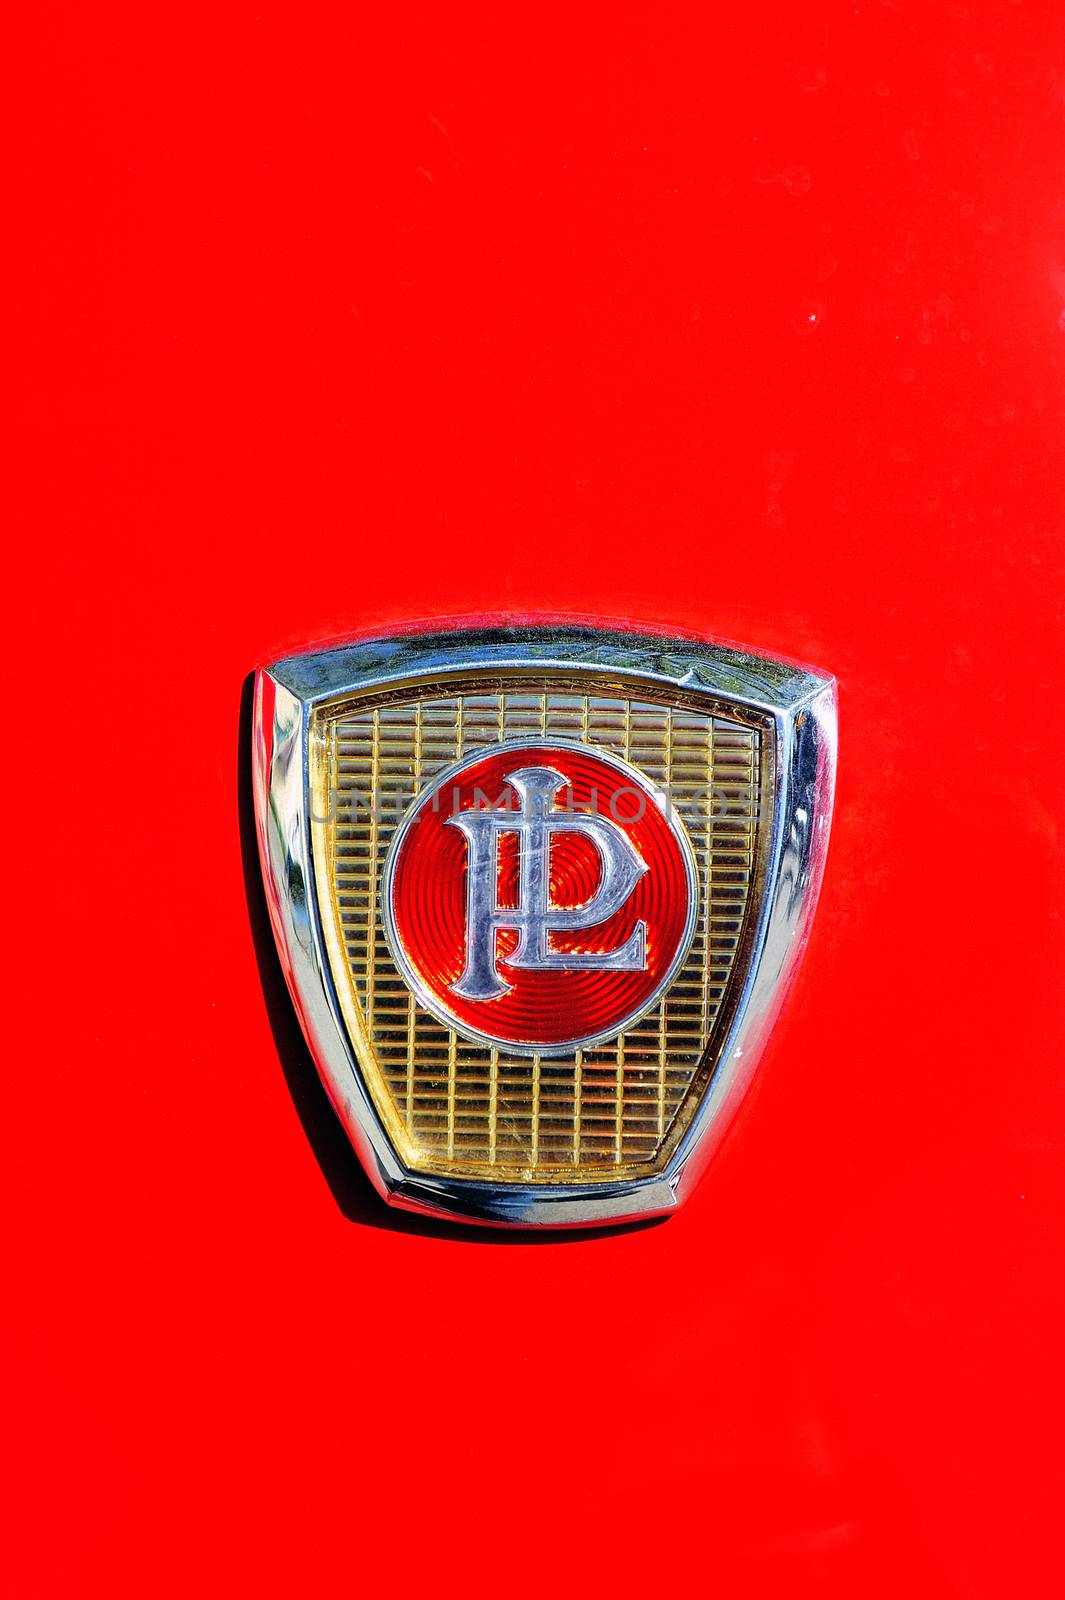 Panhard brand on the hood of a PL17 manufactured in 1959 photographed the rally of vintage cars Town Hall Square in the town of Ales, in the Gard department